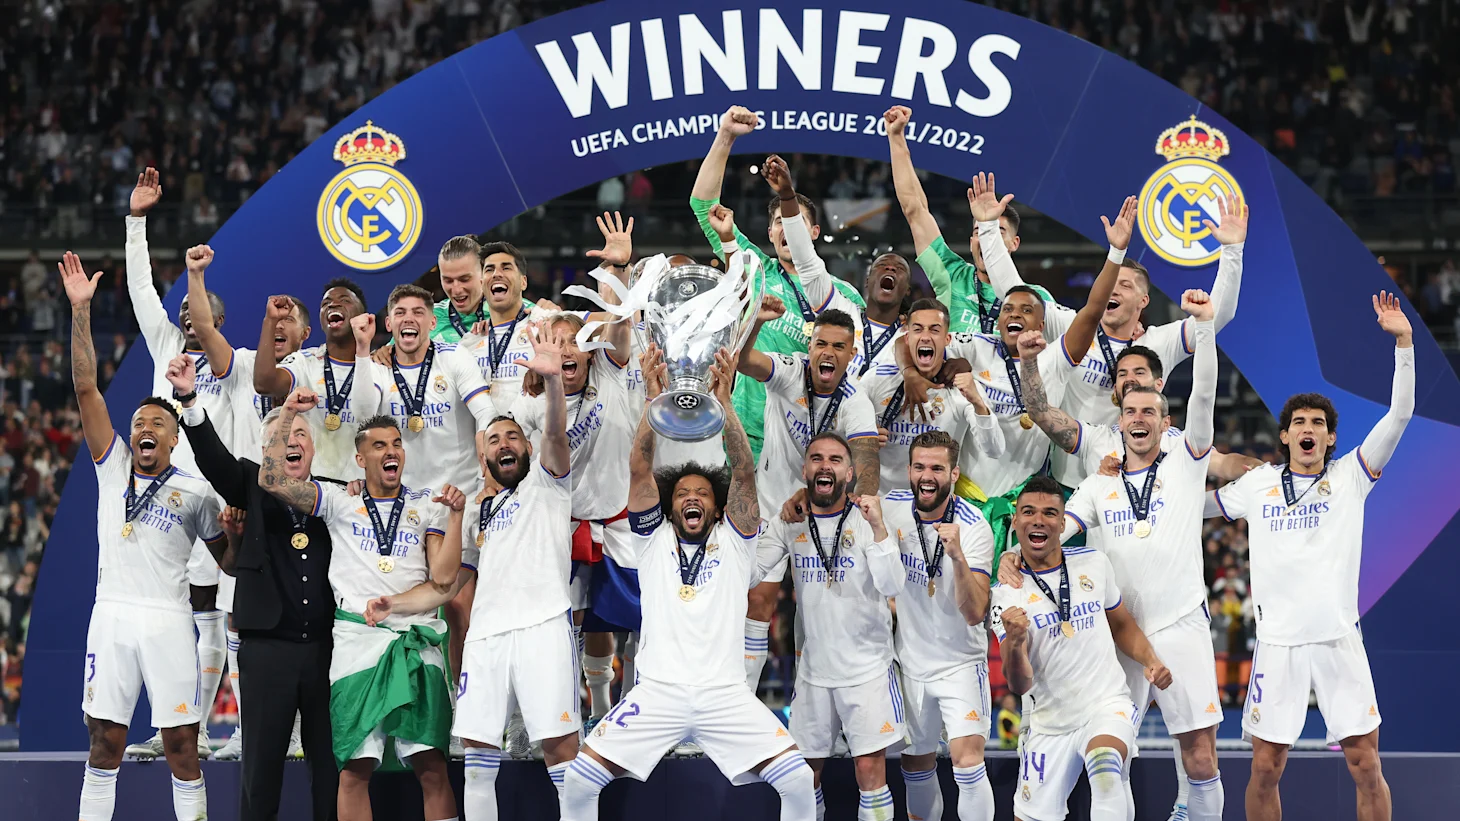 The History of the Champions League